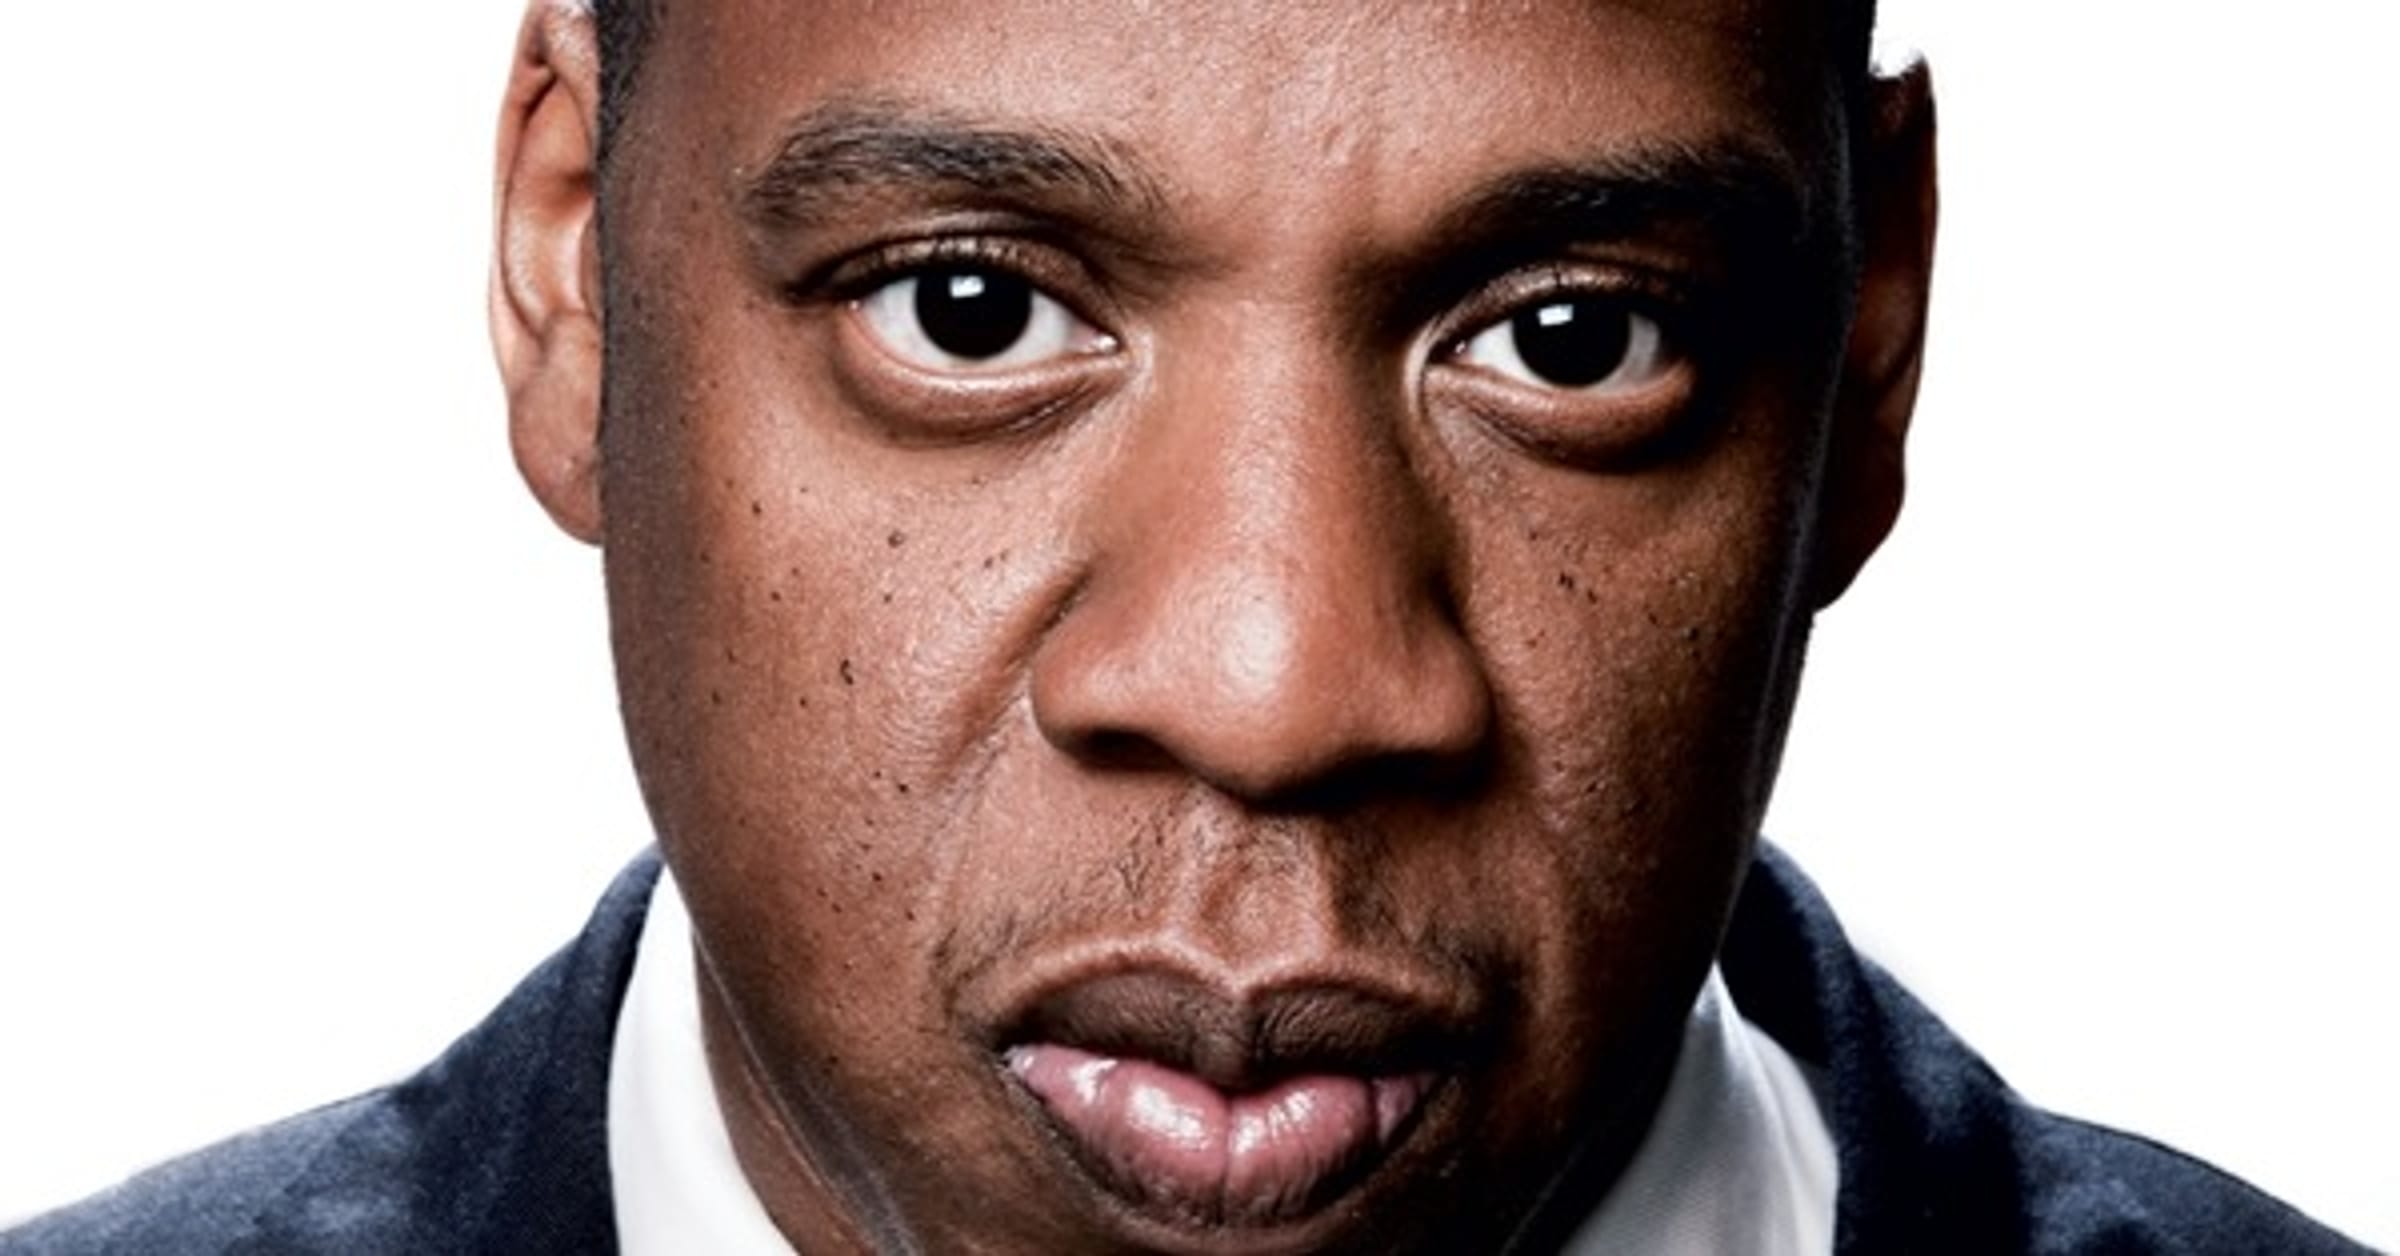 JUNE 05, 2019 - JAY-Z BECOMES THE FIRST HIP-HOP BILLIONAIRE ACCORDING TO  FORBES MAGAZINE. THE 49-YEAR-OLD RAPPER, RECORD PRODUCER AND ENTREPRENEUR  AND HIS WIFE RECORDING ARTIST BEYONCE KNOWLES NOW HAVE AN ESTIMATED